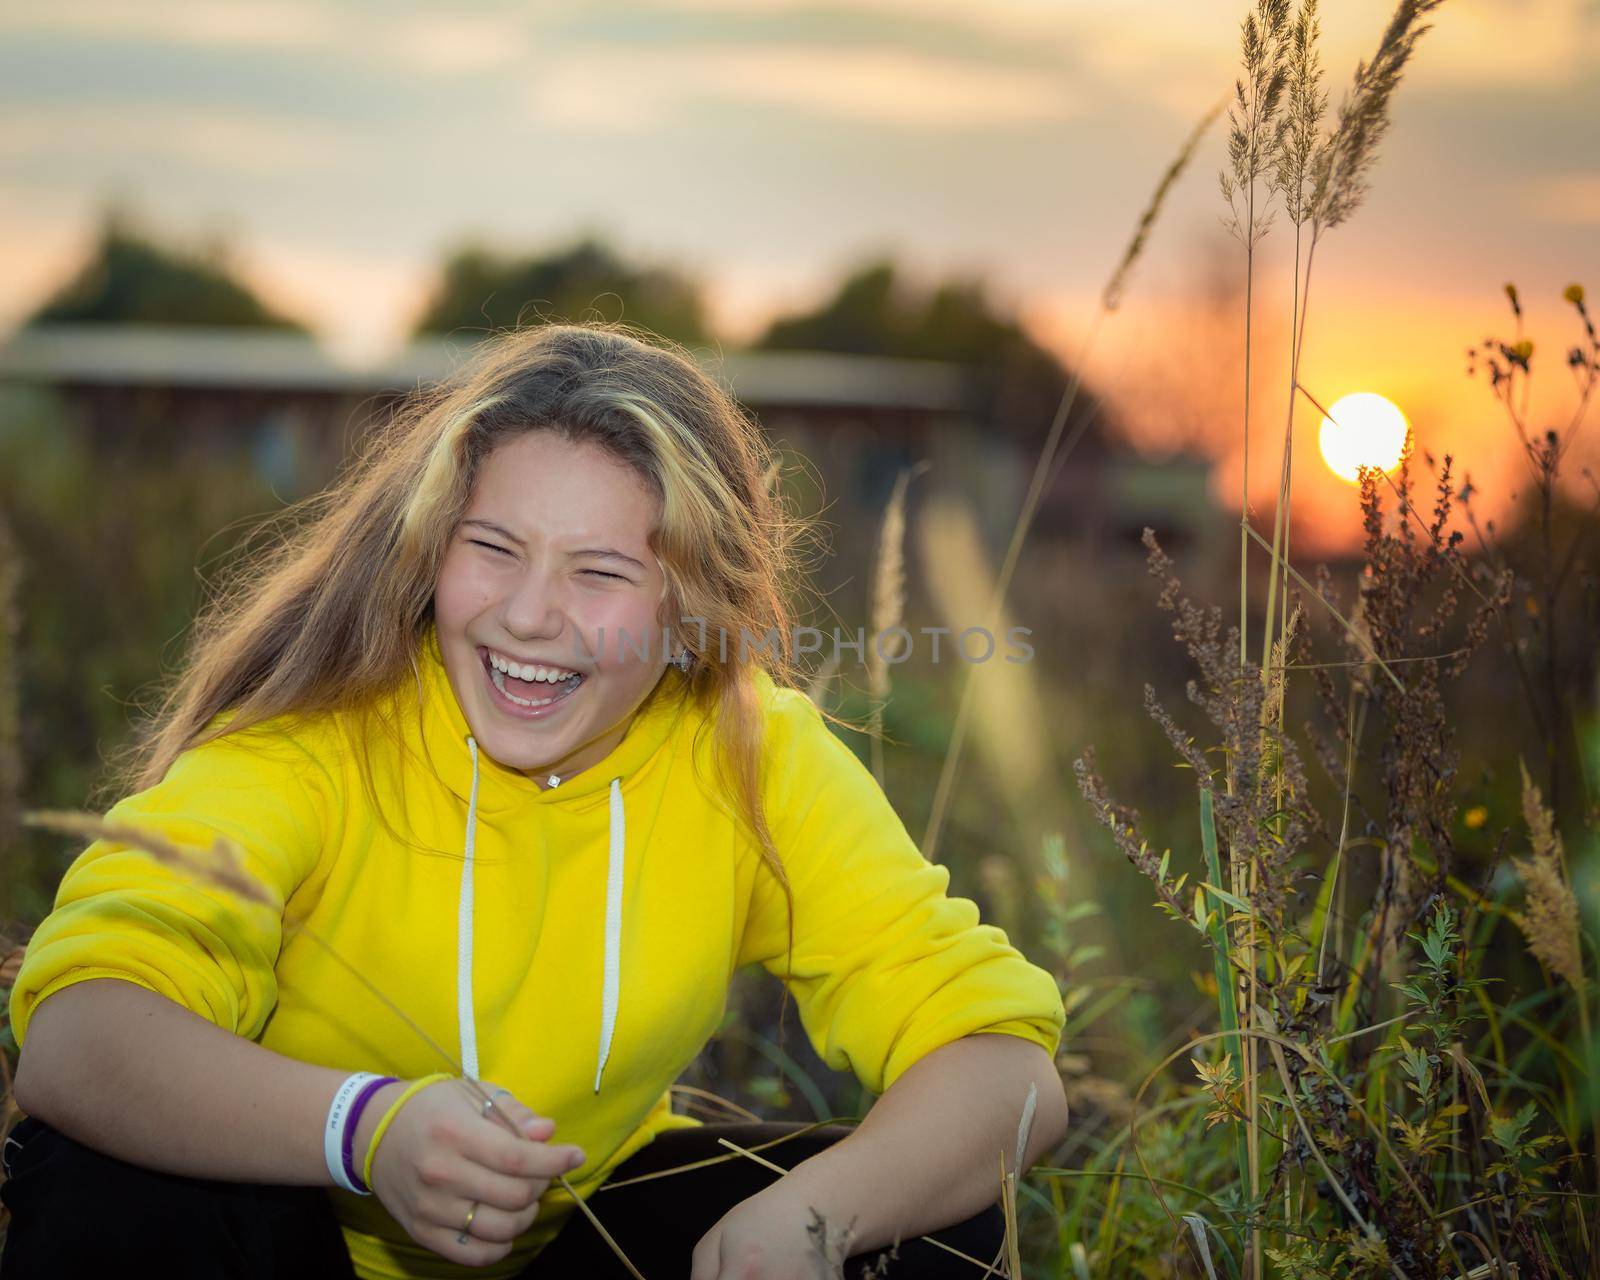 A young girl with long hair on a meadow with tall grass in the rays of the setting sun. Blonde hair. Yellow jacket.